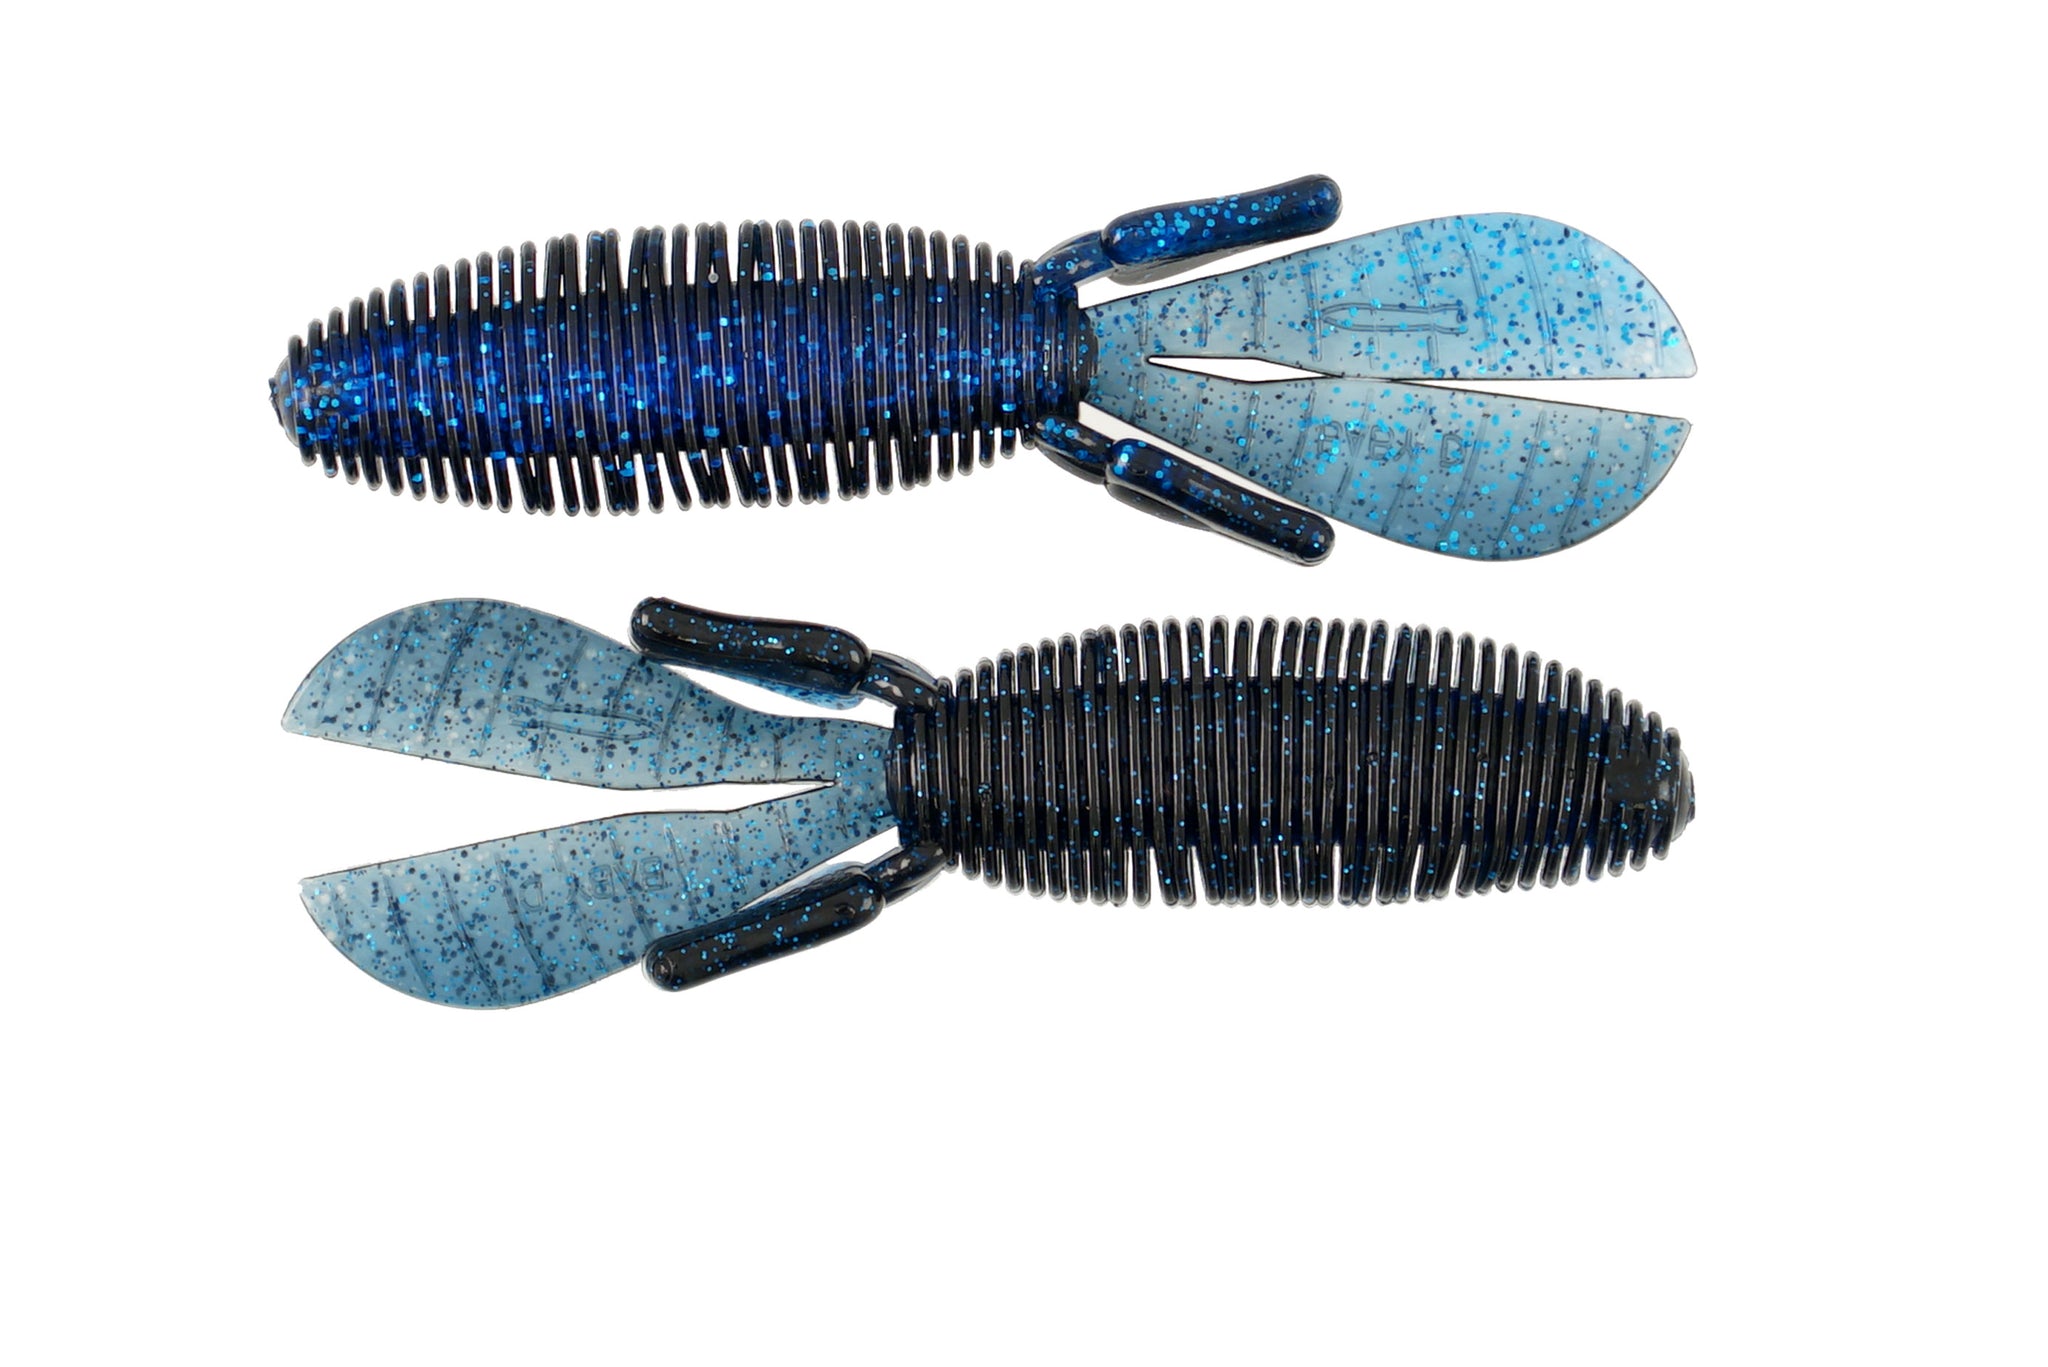 Missile Baits Baby D Stroyer Creature MBBDS5-JNBG Junebug 